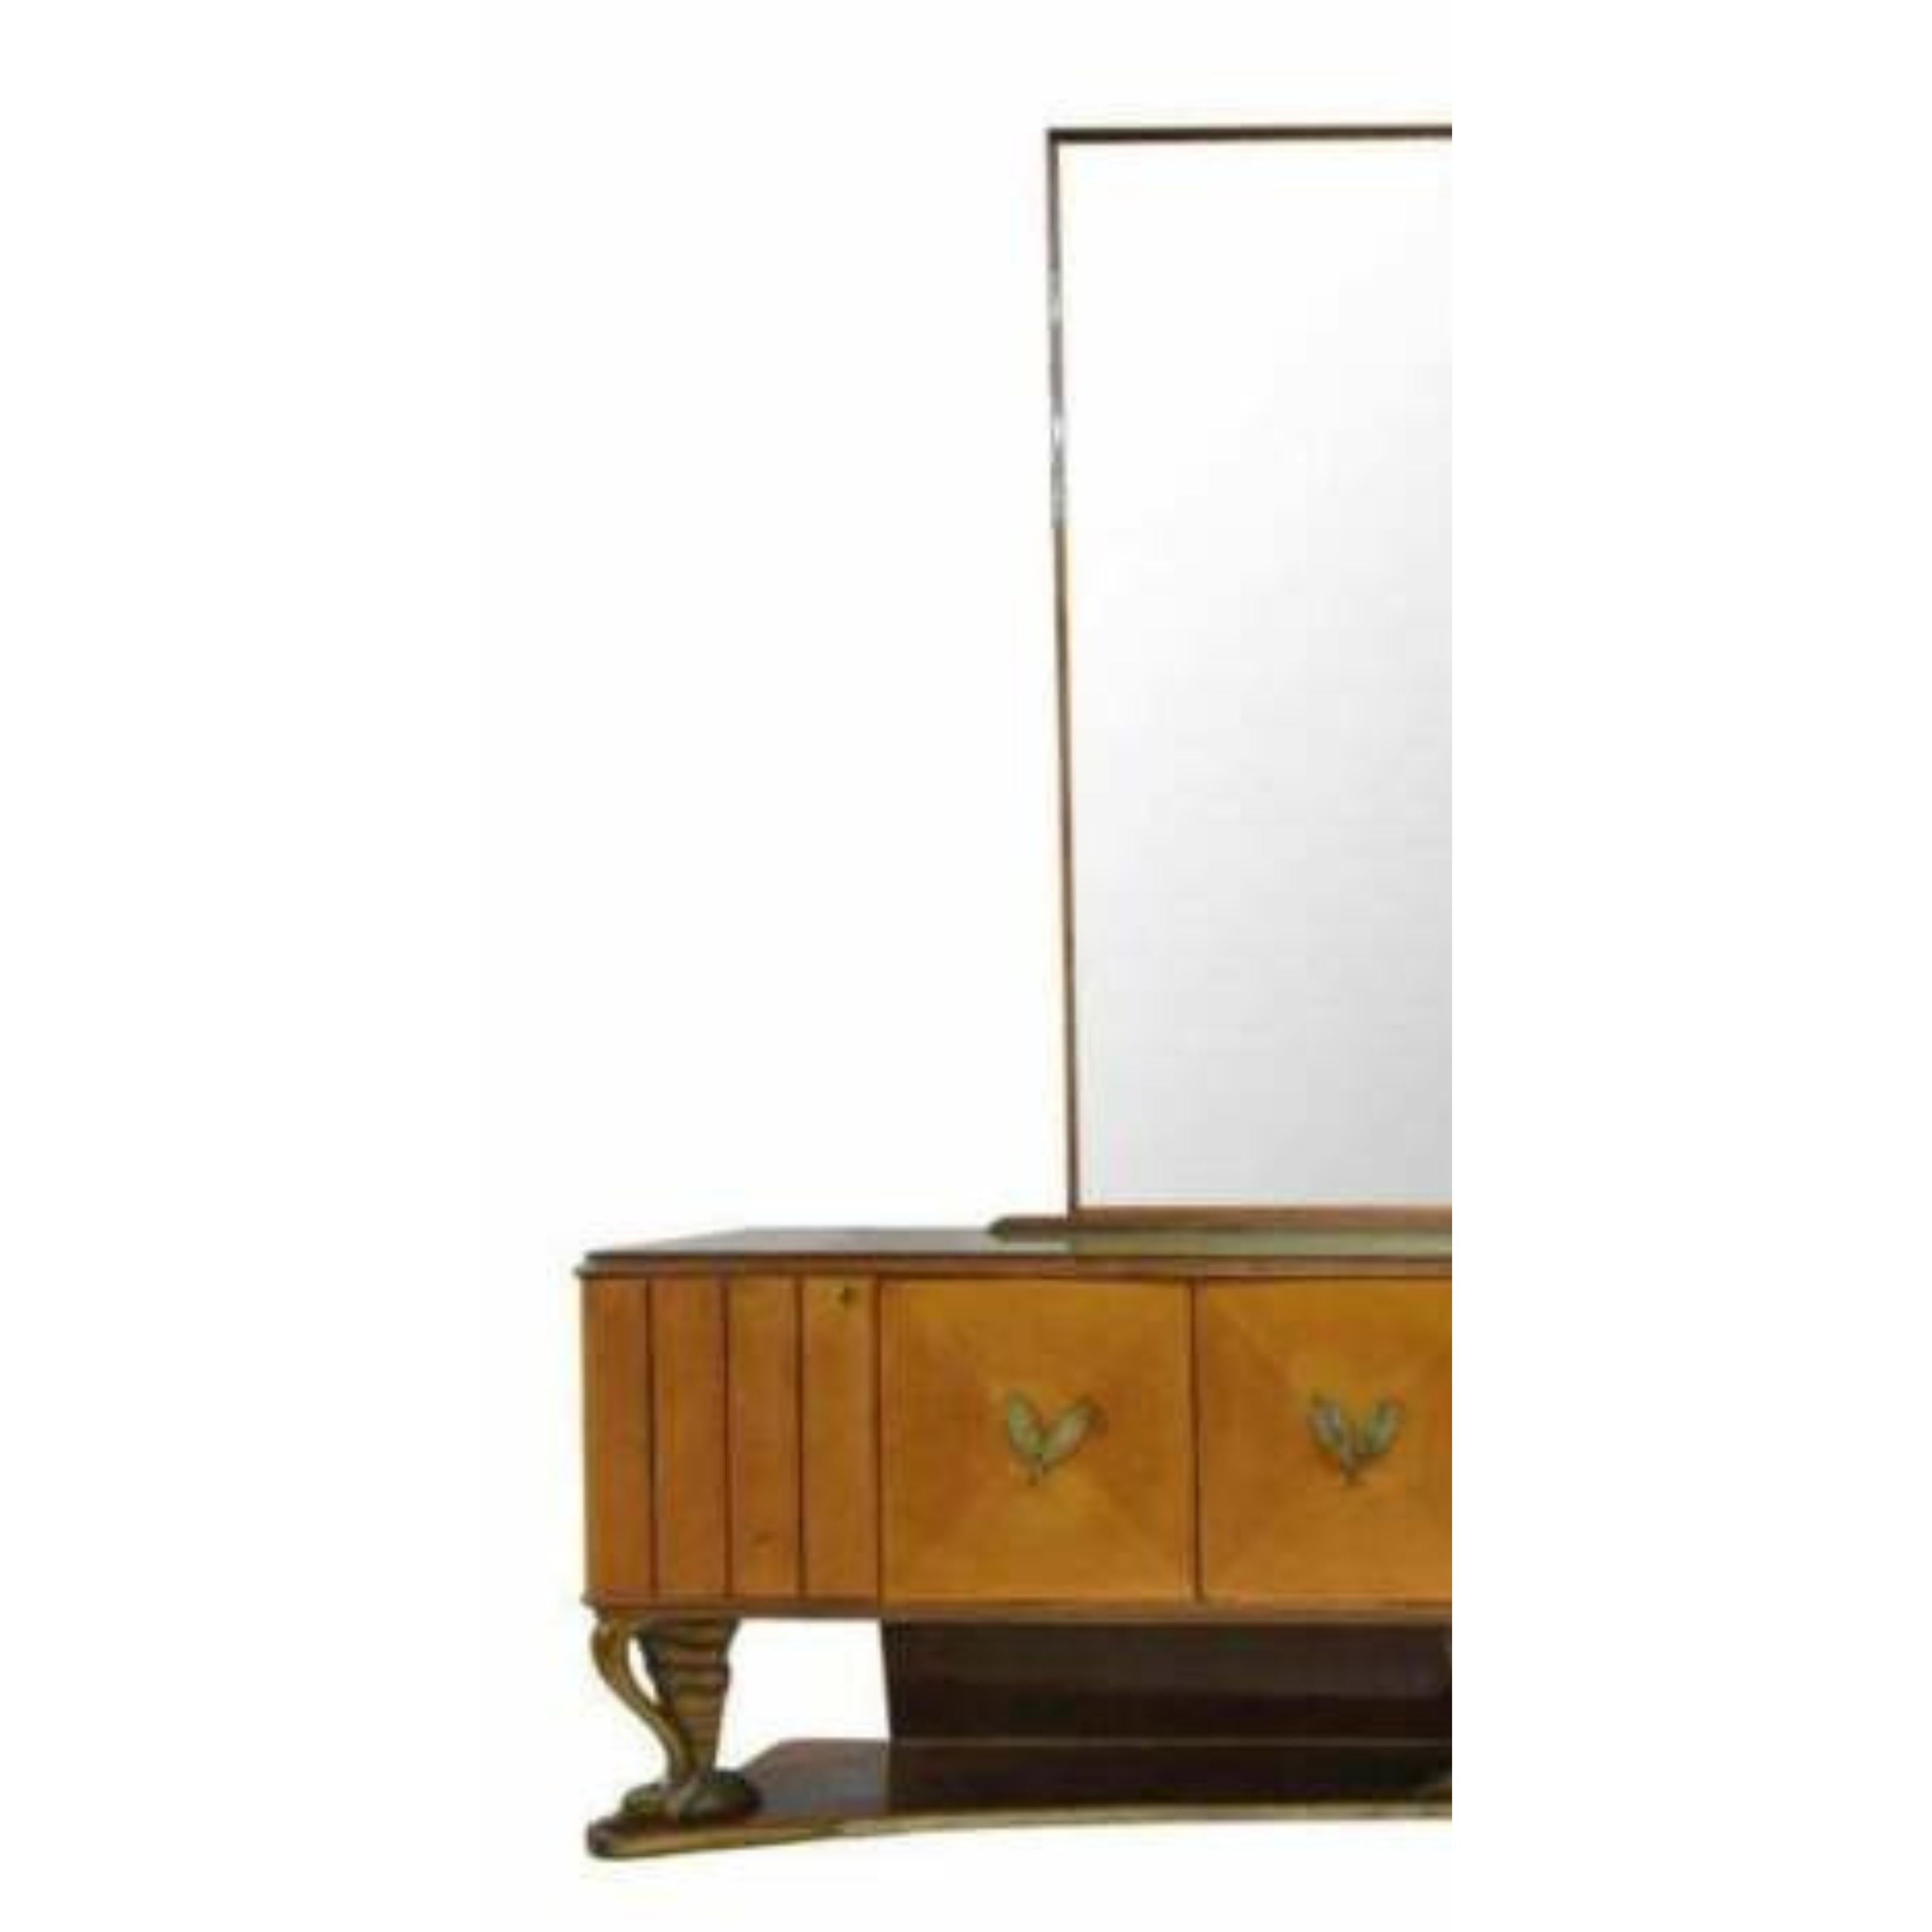 Gorgeous Sideboard, Dining, Massive with Mirror Italian Mid Century Modern, Vintage!!

Monumental Italian mid-century modern mirrored sideboard, in the manner of Vittorio Dassi (Italian, 1893-1973), c.1950s, framed flat mirror plate with etched